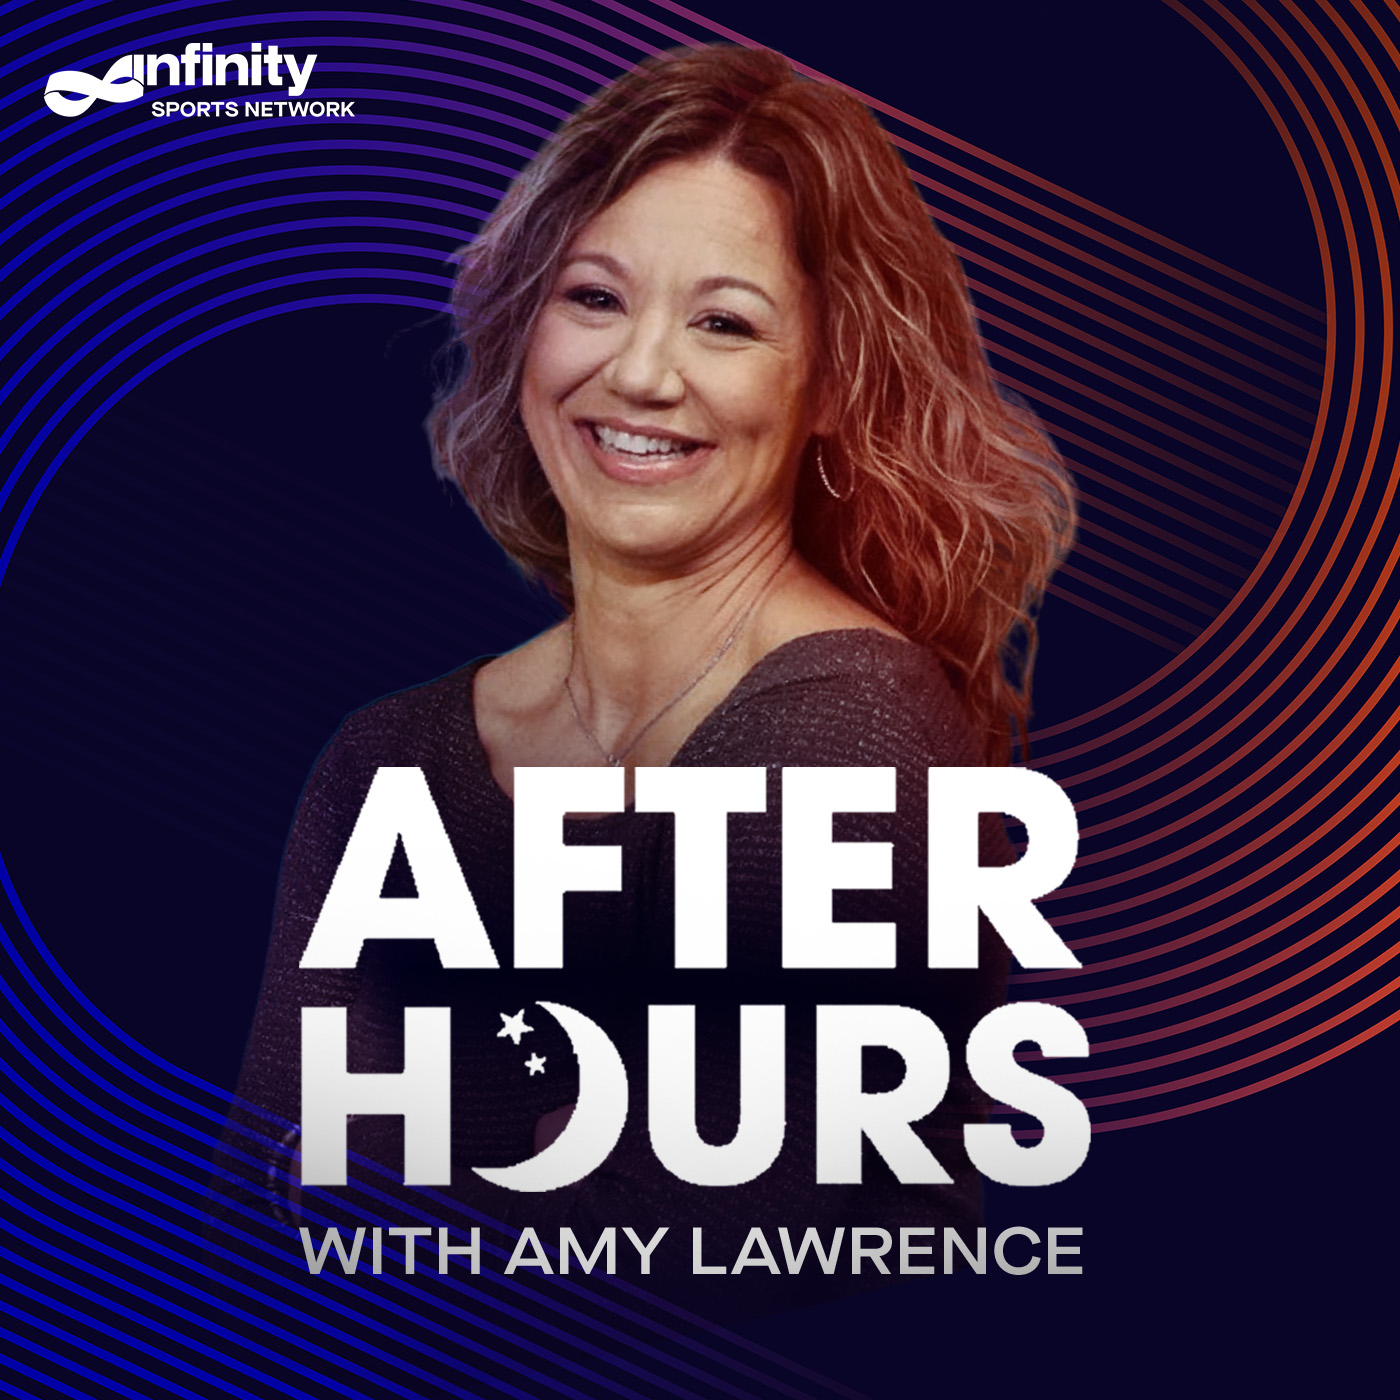 6/17/21 After Hours with Amy Lawrence PODCAST: Hour 2